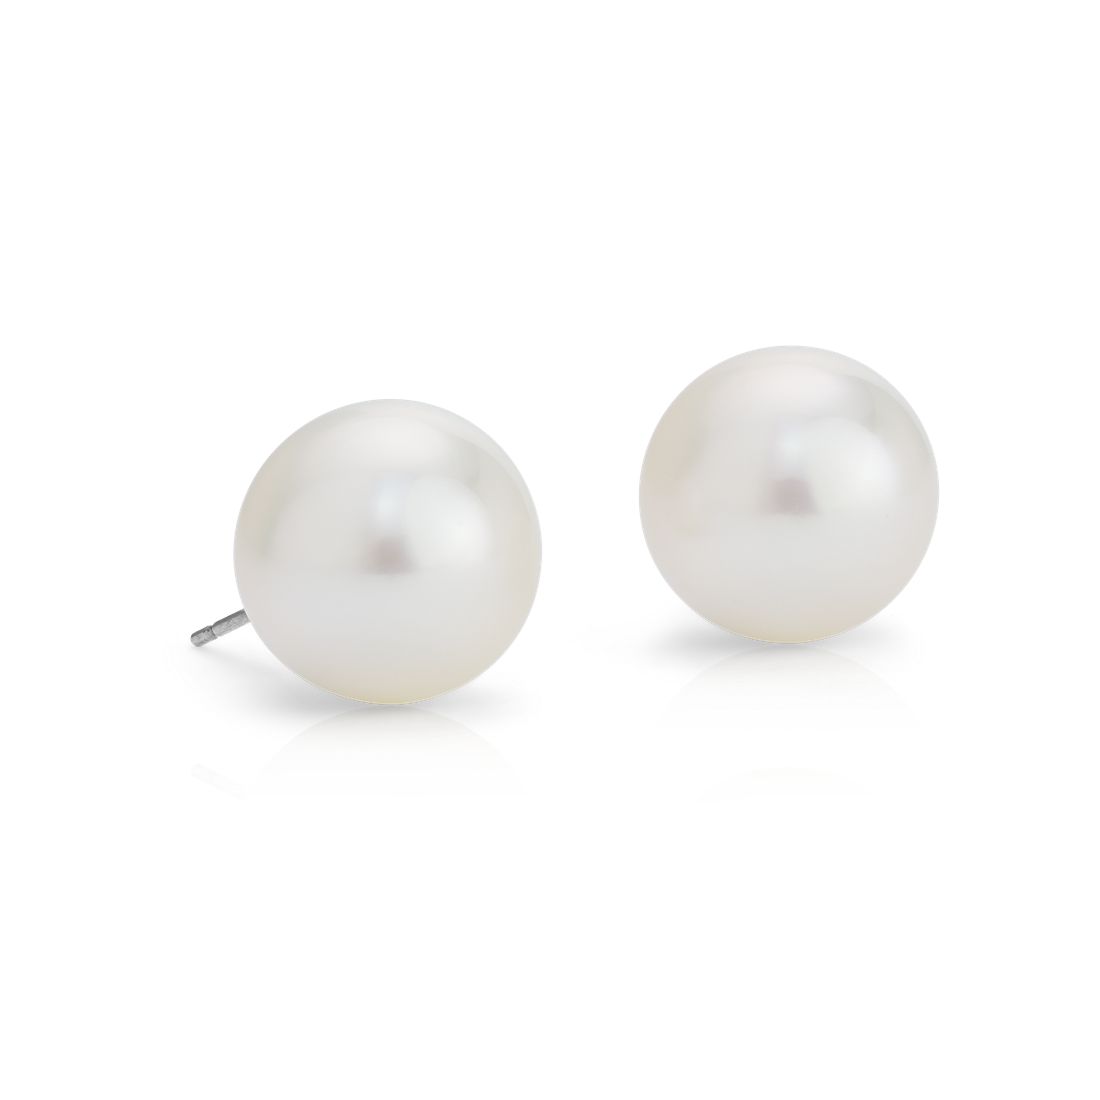 South Sea Cultured Pearl Stud Earrings in 18k White Gold (11-12mm)